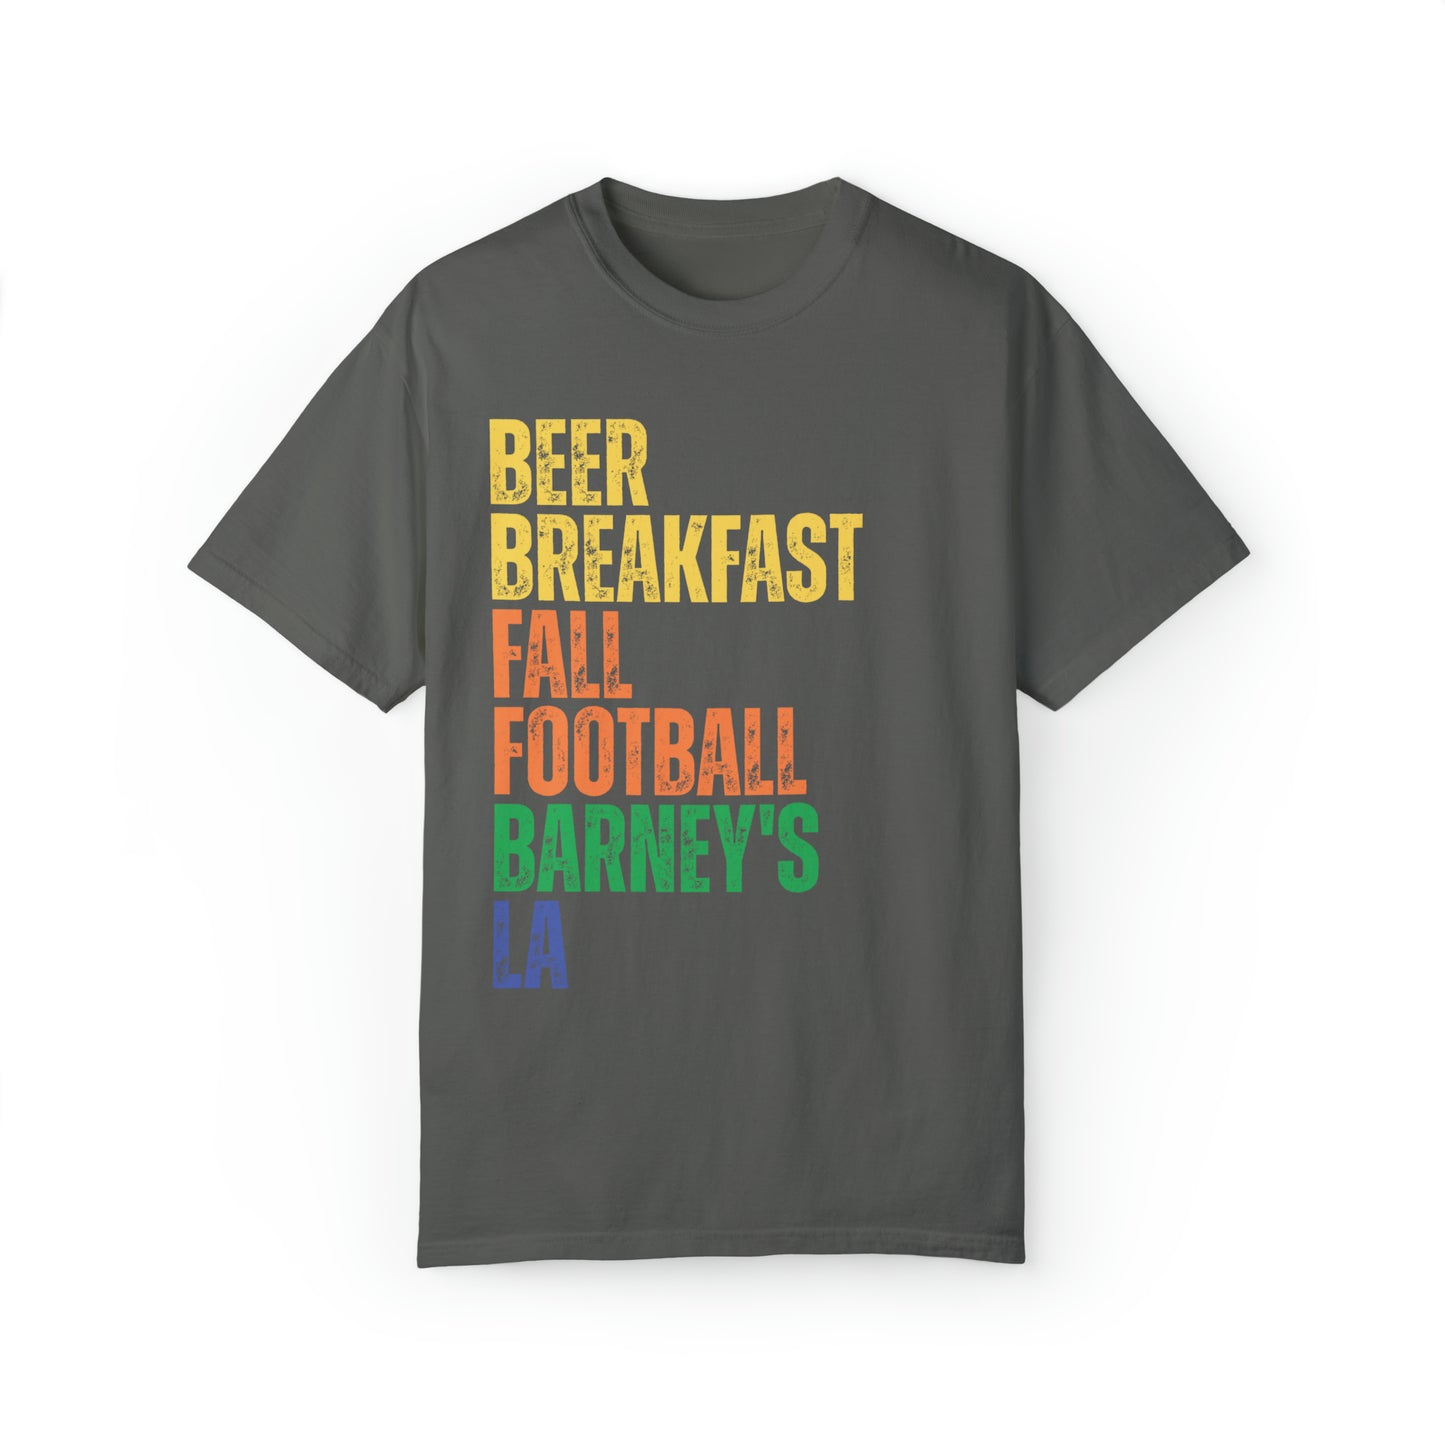 Beer Breakfast Fall Football | BARNEY'S BEANERY - Men's Graphic Tee | Pepper Comfort Colors 1717 T-Shirt, Front View Flat Lay